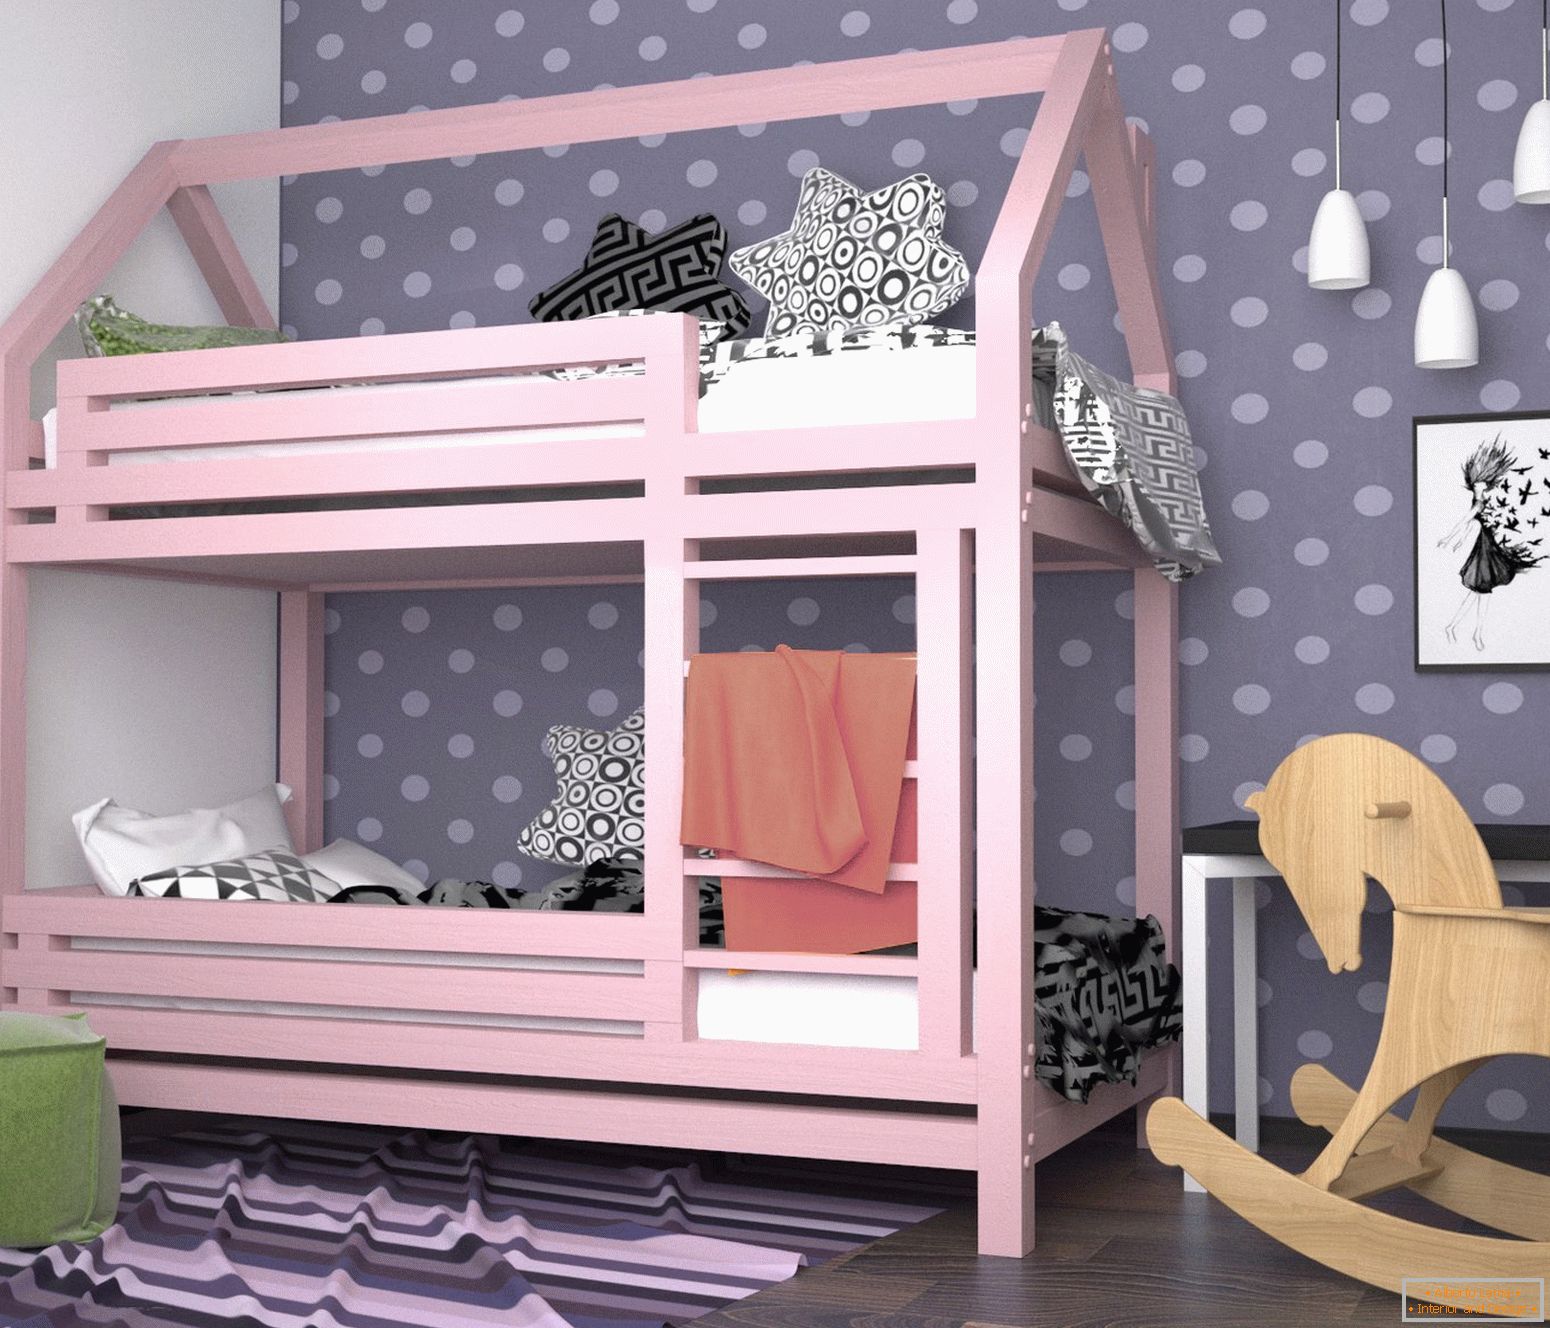 Pink bunk bed in a nursery for a girl